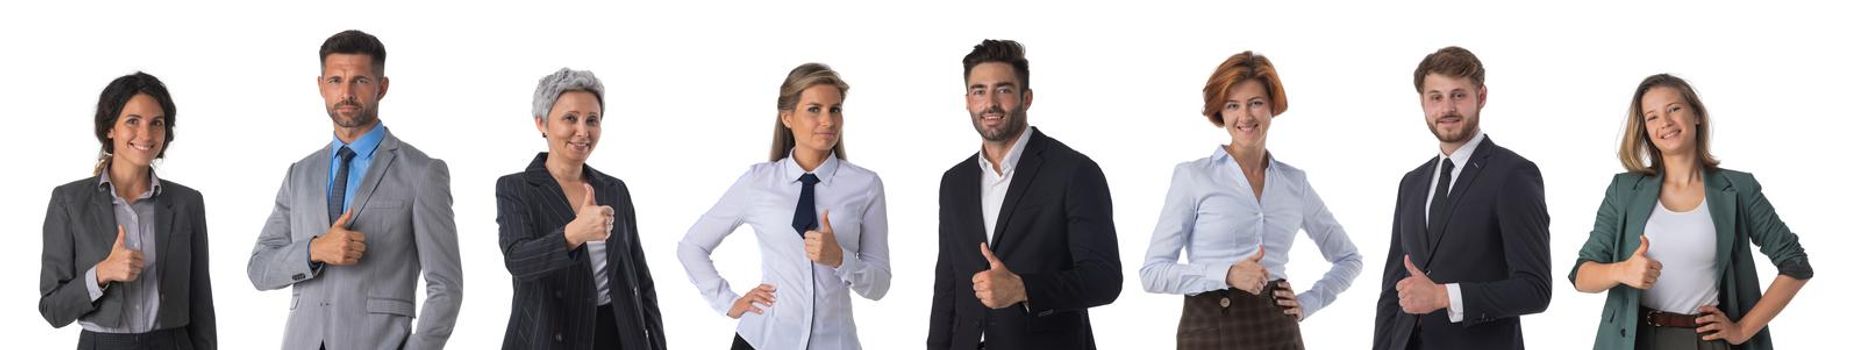 Set of business people with thumb up isolated on white background